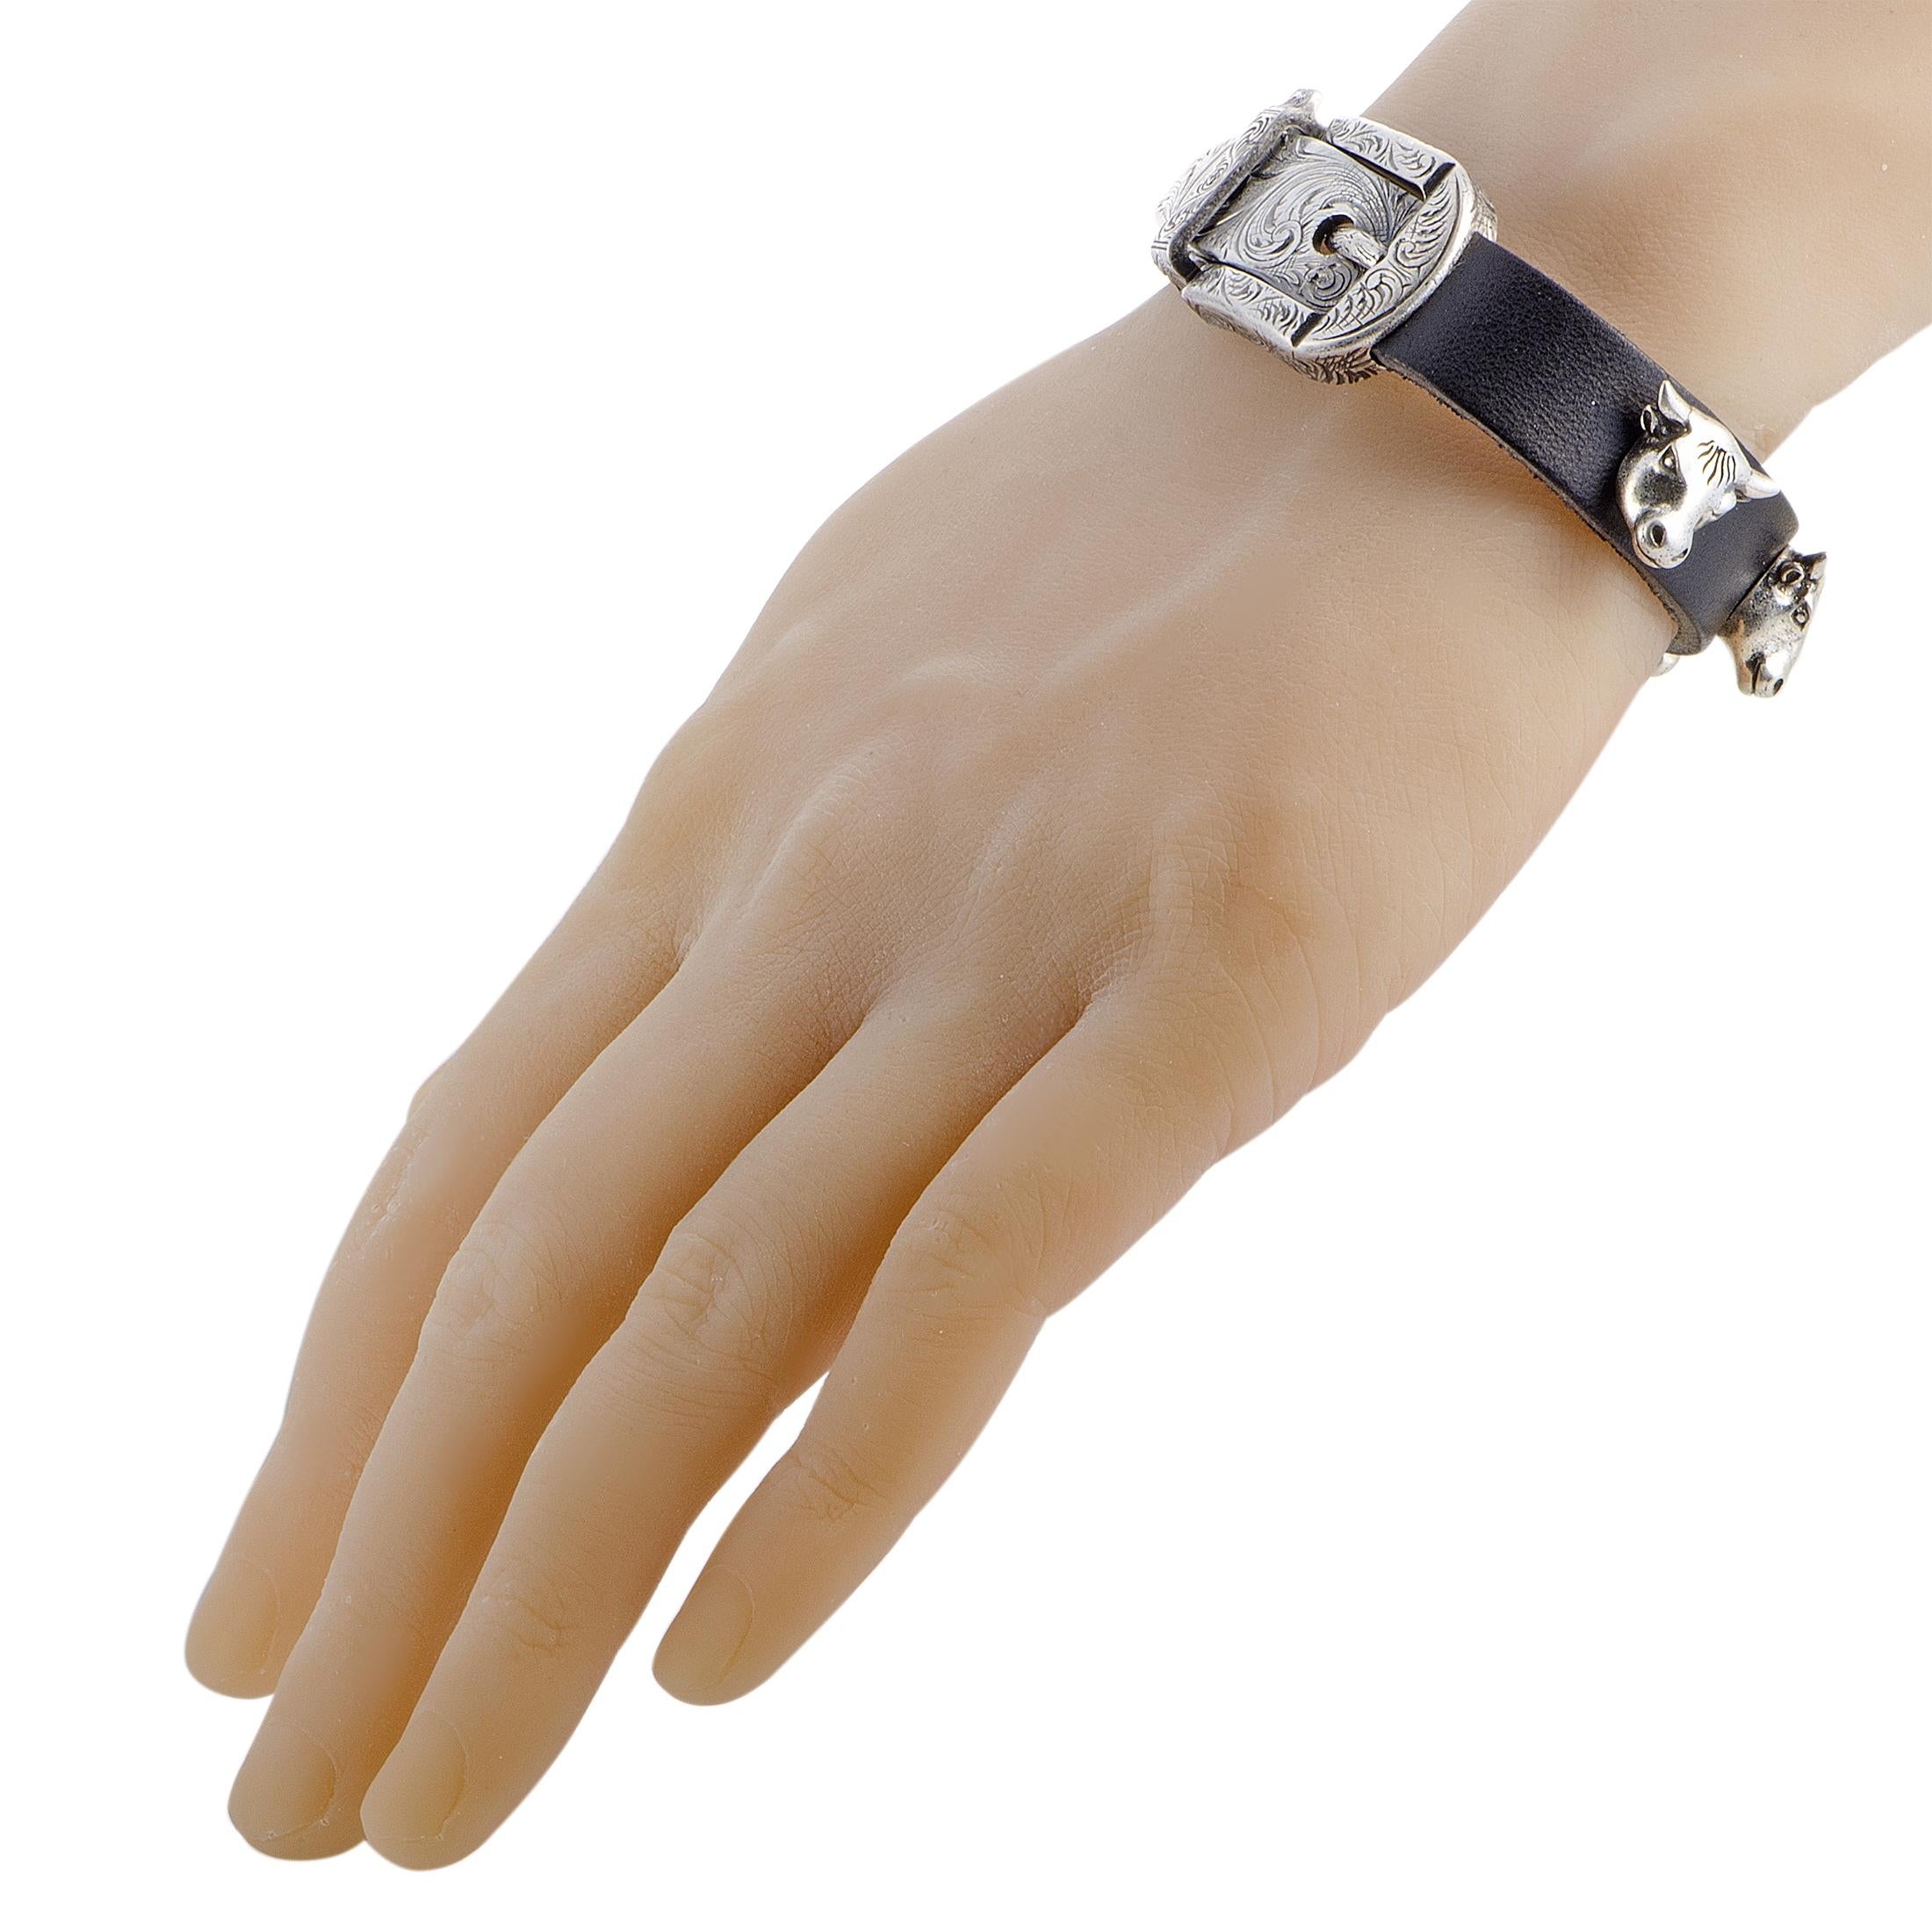 The Gucci “Anger Forest” bracelet is made out of aged sterling silver and black leather and weighs 71 grams. The bracelet measures 8” in length and 2.55” in diameter. 
 
 This item is offered in brand new condition and includes the manufacturer’s